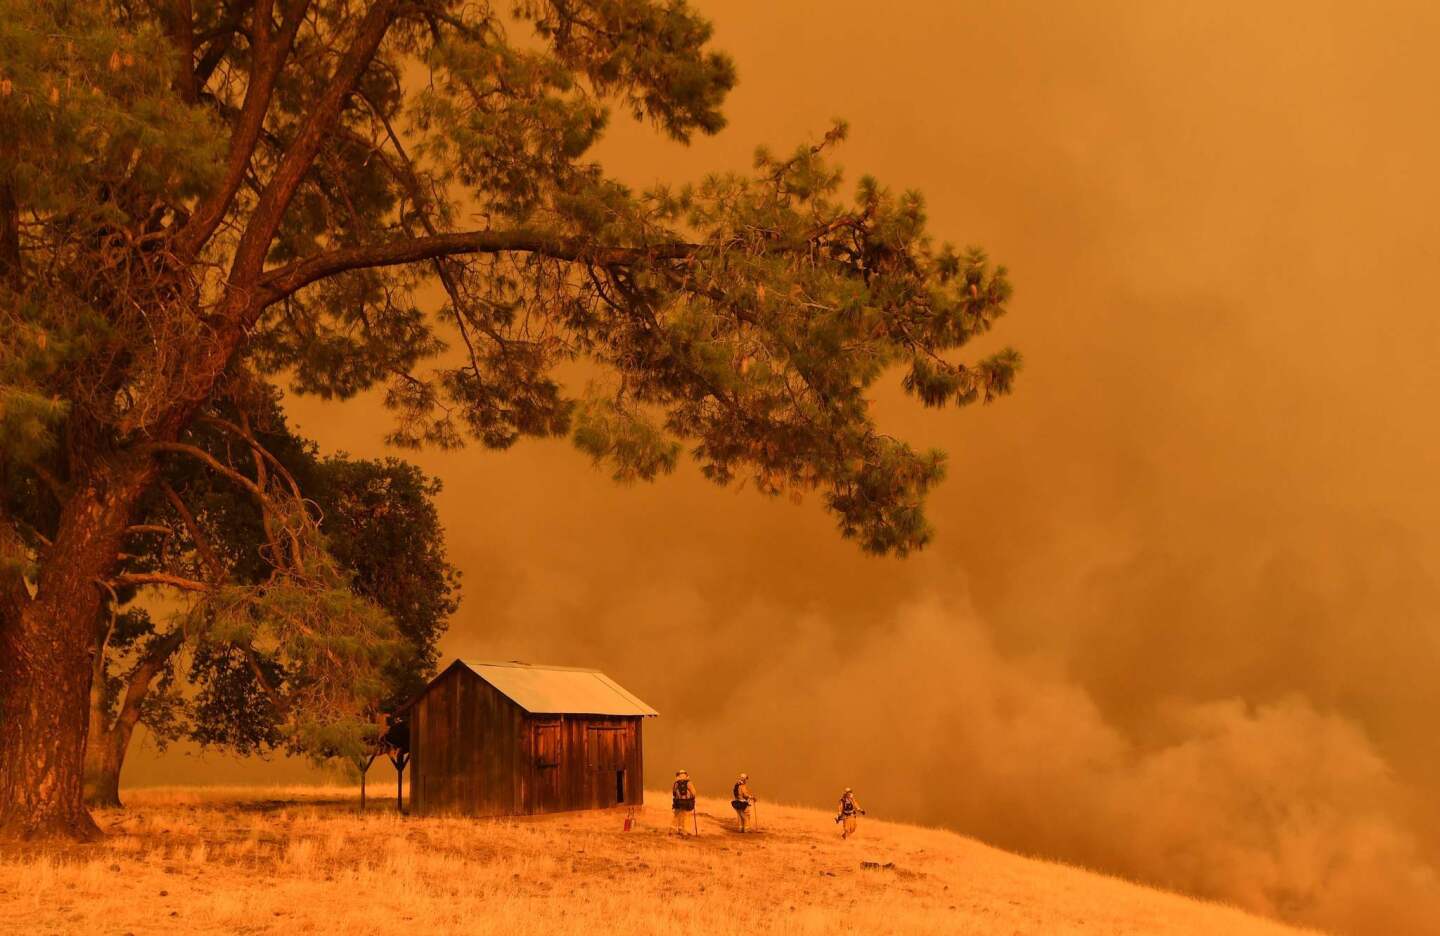 Firefighters watch as flames from the County fire climb a hillside in Guinda. California authorities have issued red flag weather warnings and mandatory evacuation orders after a series of wildfires fanned by high winds and hot temperatures ripped through thousands of acres.